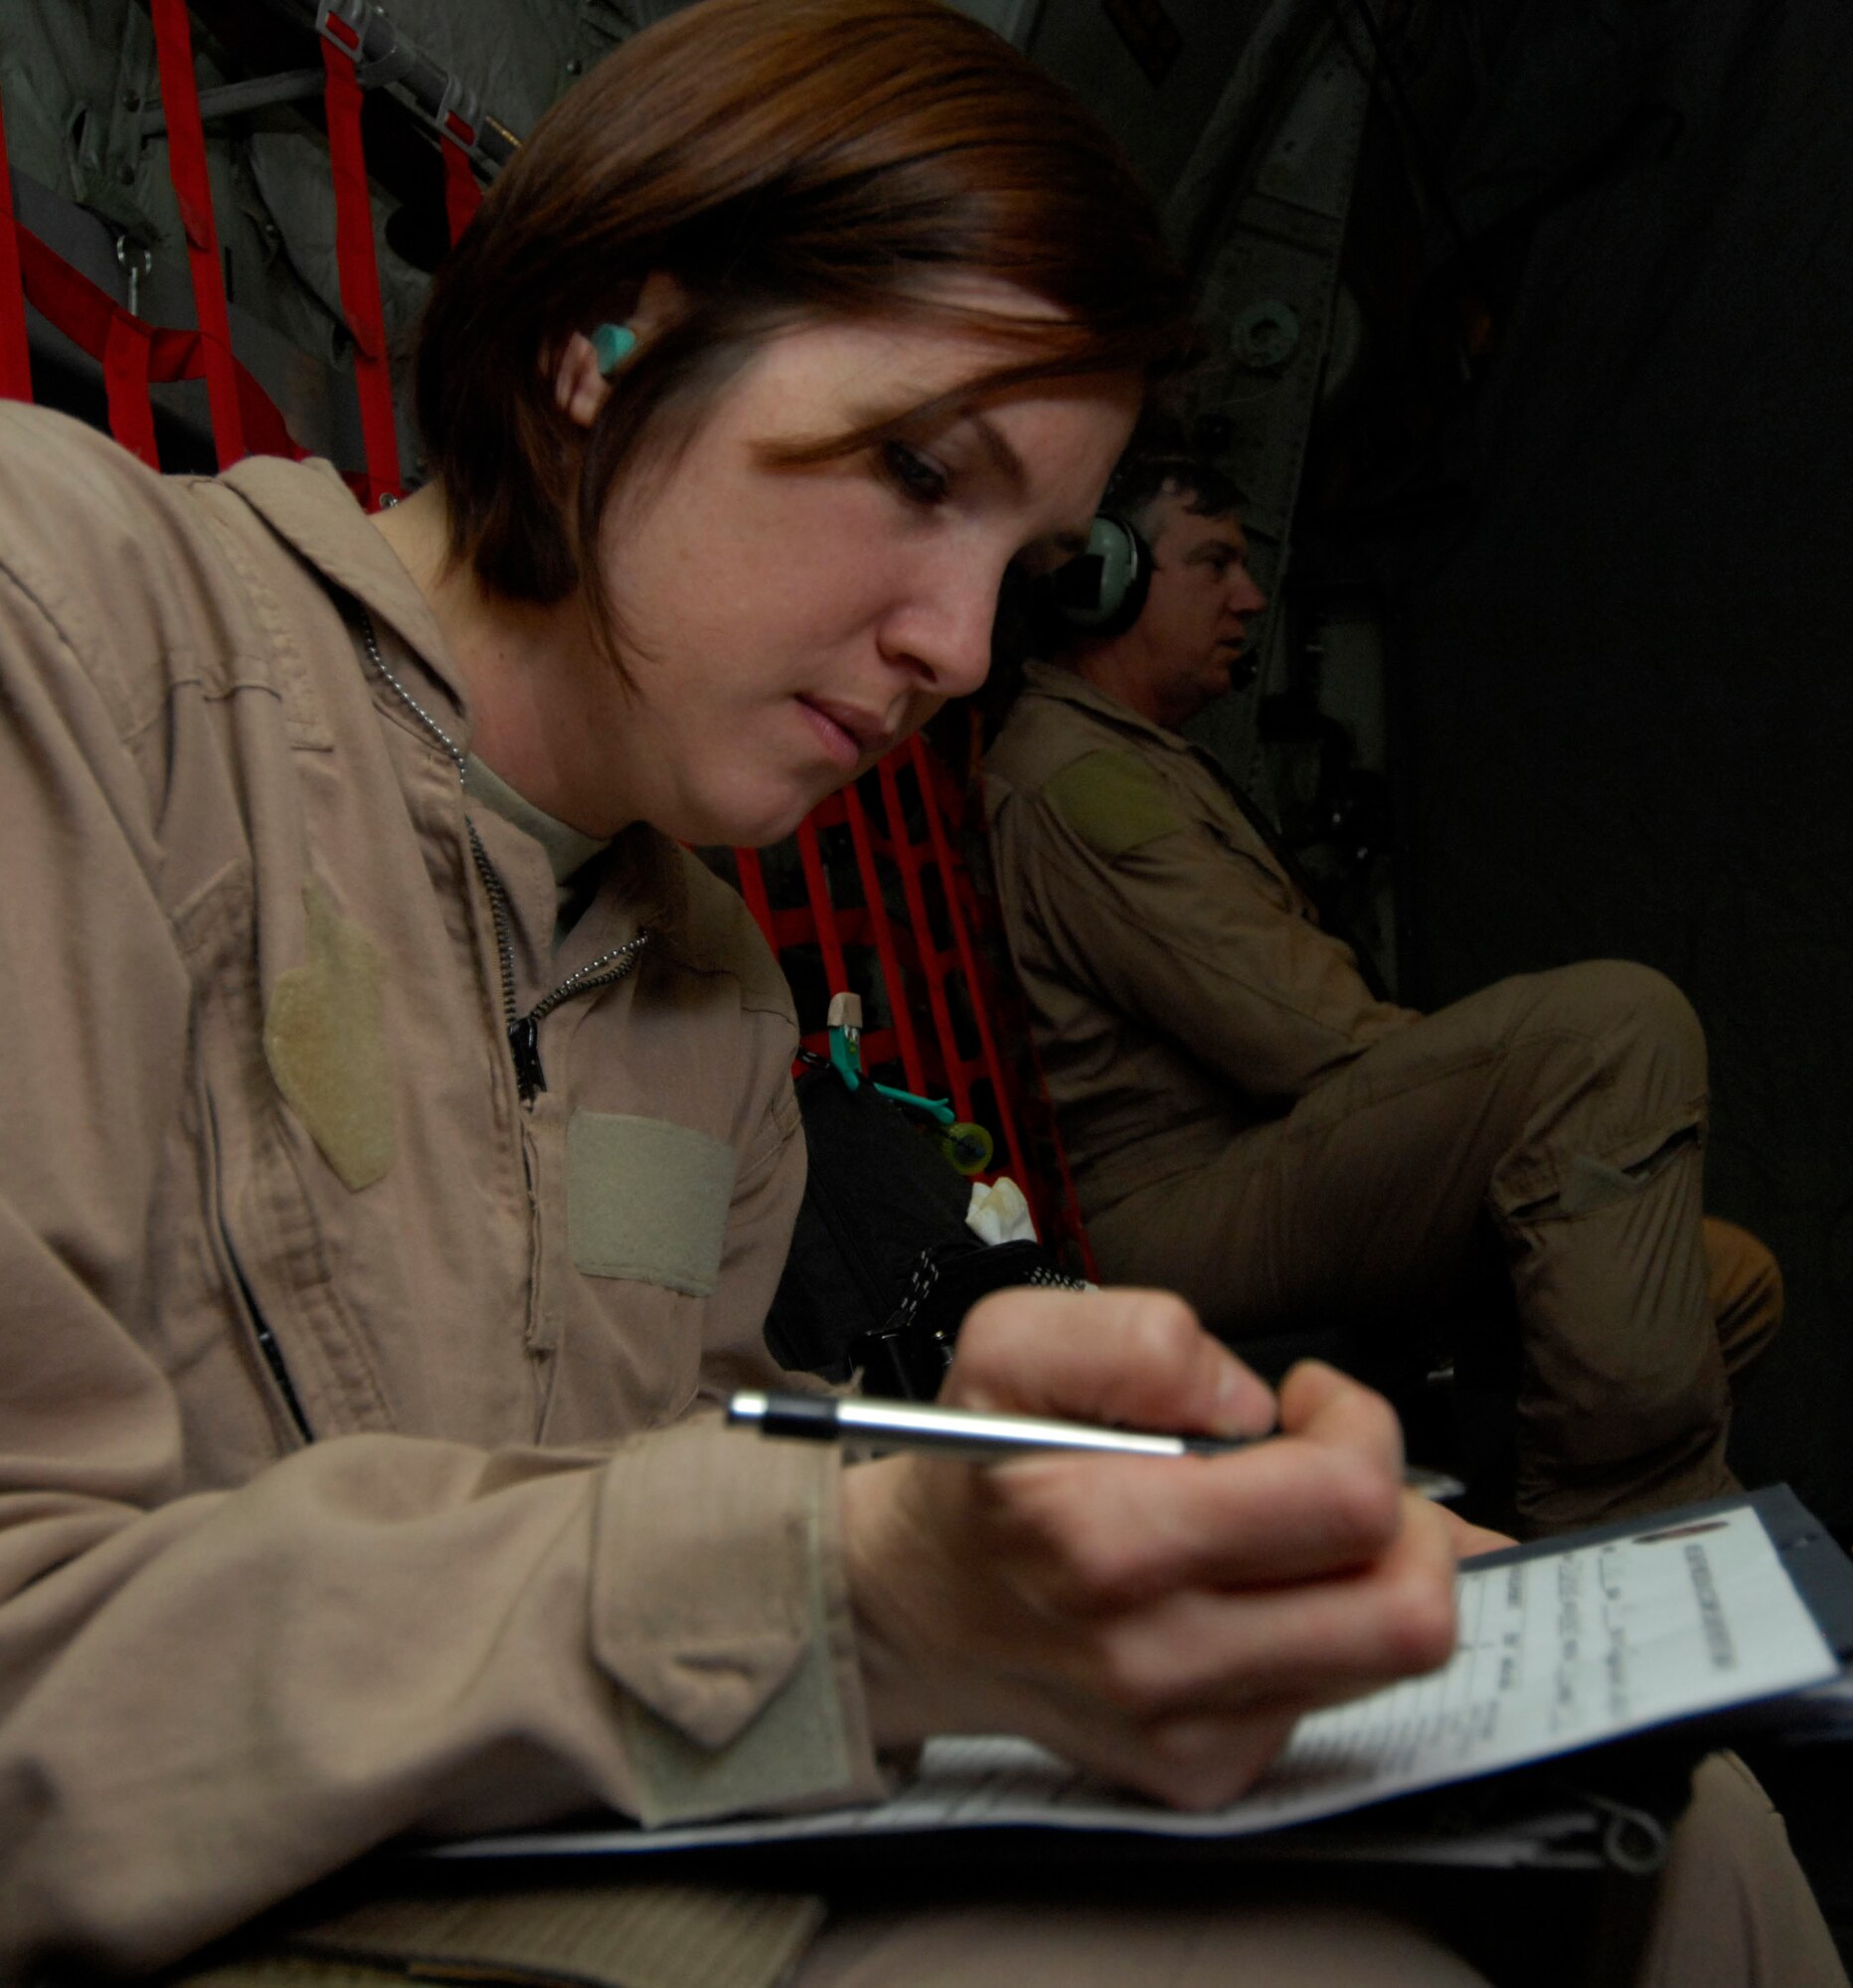 Capt. Susan McCormick, 455th Expeditionary Aeromedical Evacuation Flight, keeps track of the patient's paperwork in flight, going to Bagram Air Field, Afghanistan, March 26. Captain McCormick is required to log and keep track of each patient while enroute to their destination. She is deployed from Westover Air Reserve Base, Mass. (U.S. Air Force photo/ Senior Airman Erik Cardenas)(Released)